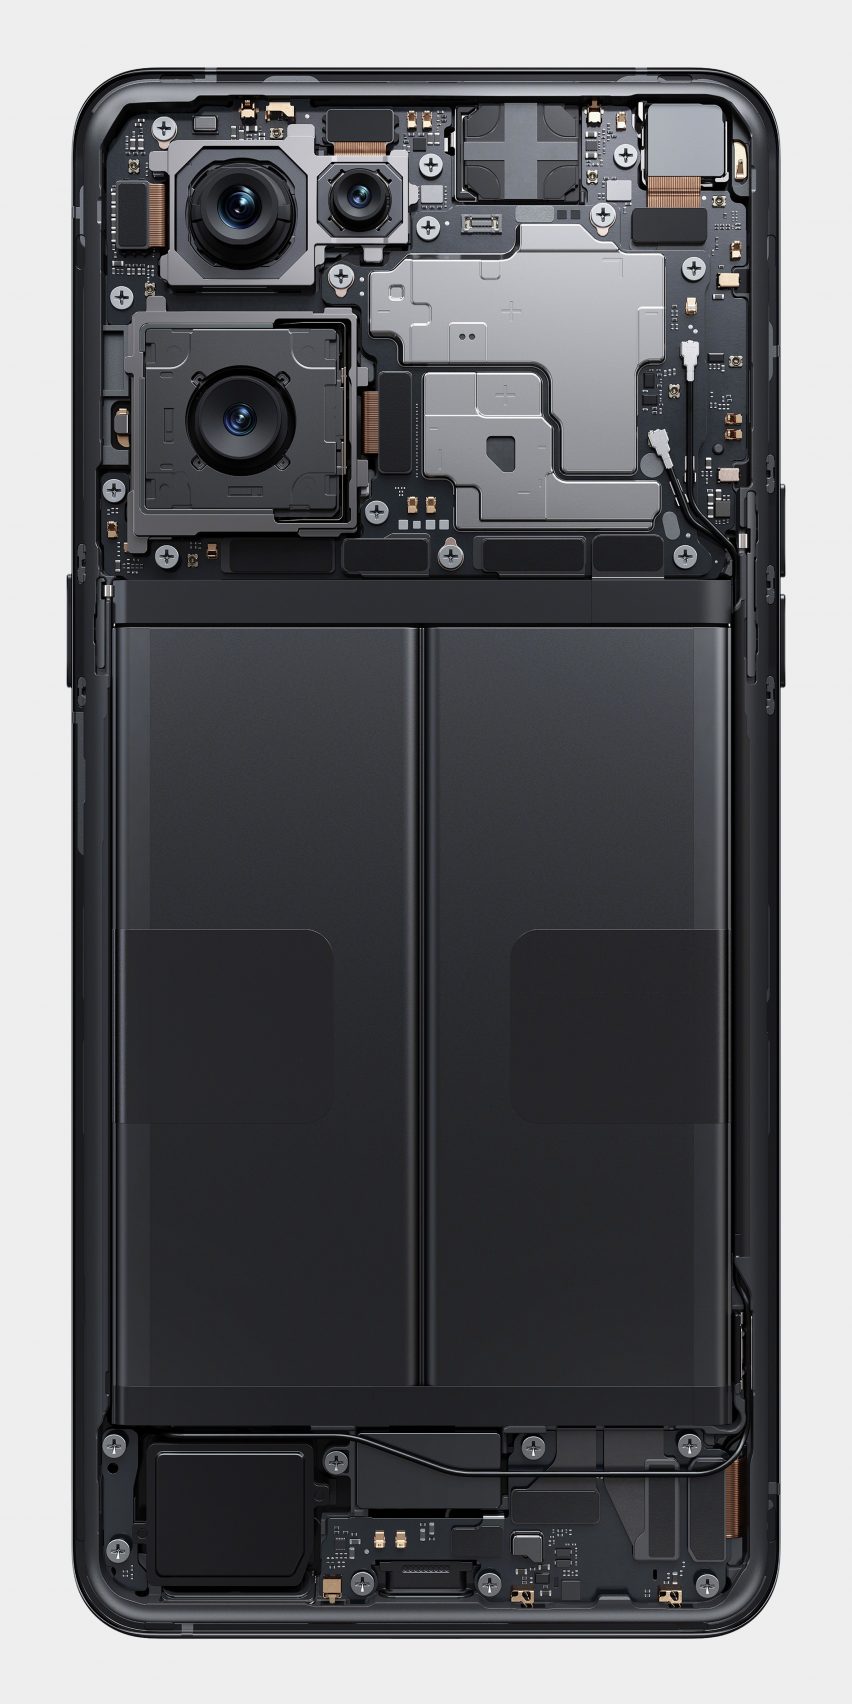 A photograph of the OPPO phone without its case